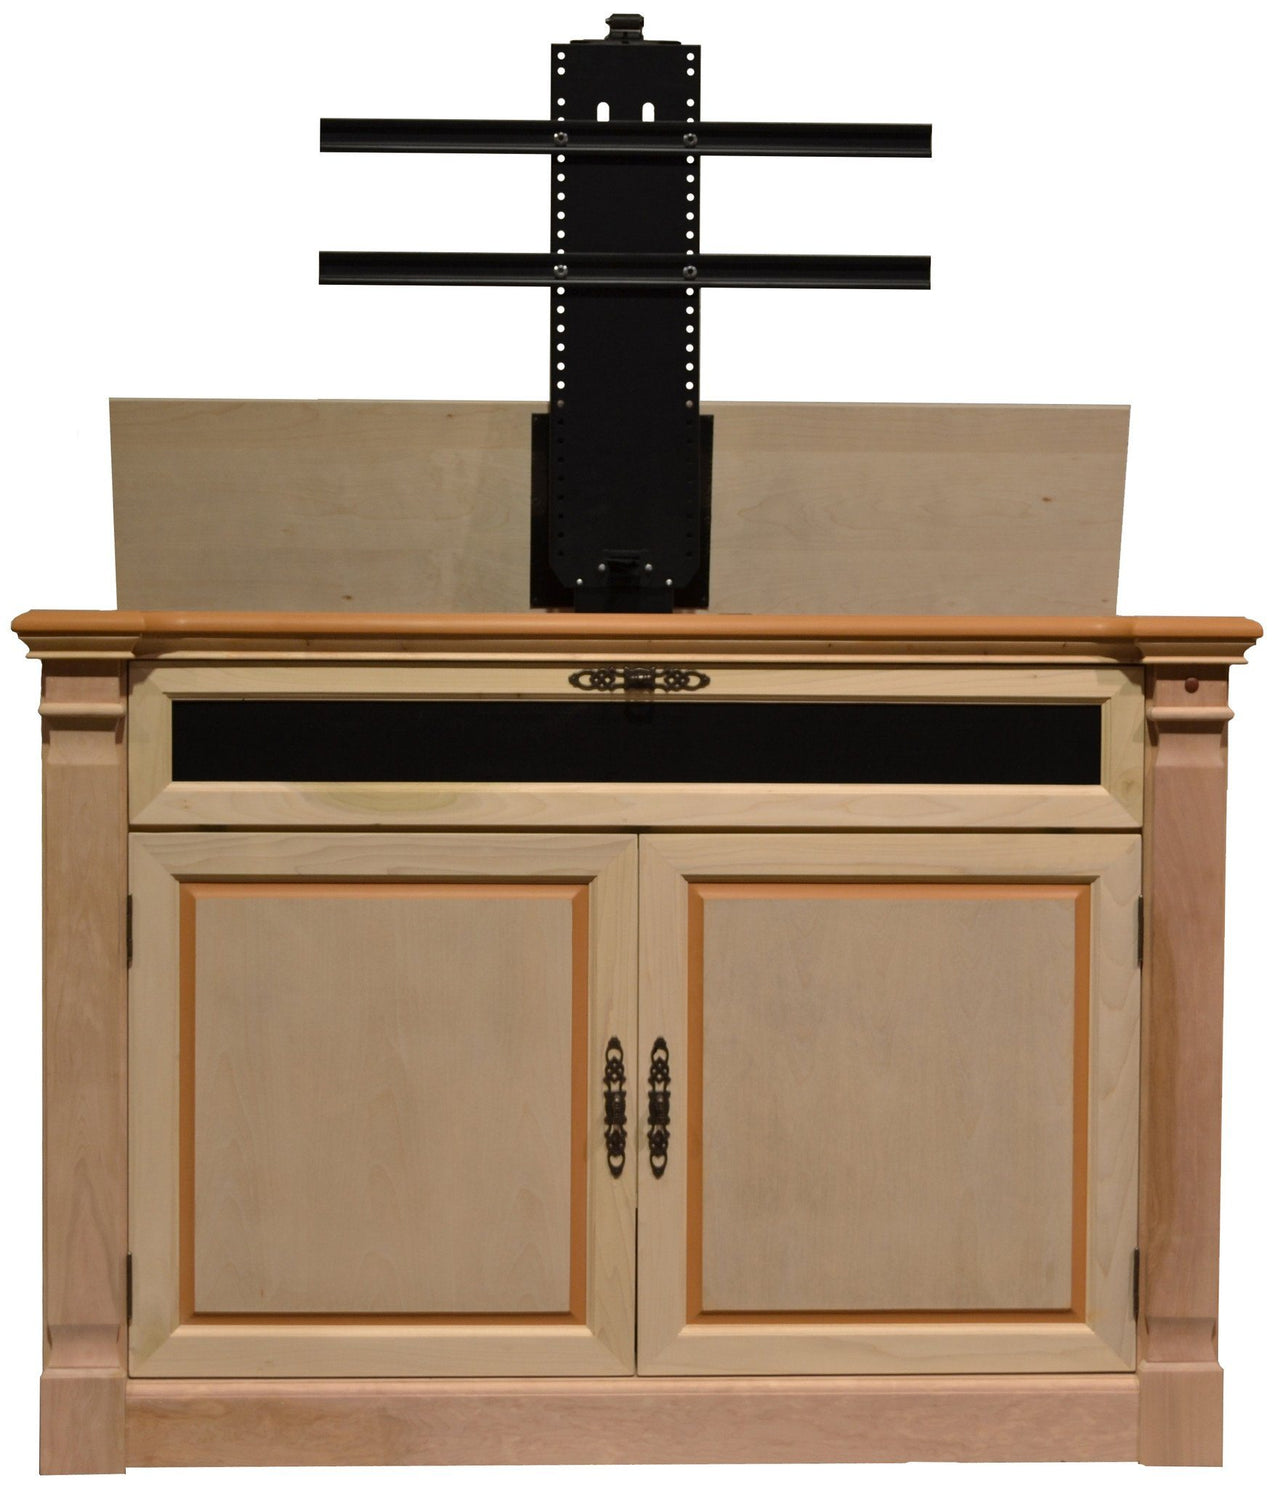 Touchstone Adonzo Unfinished Full Size Lift Cabinets For Up To 60” Flat Screen Tv’S Tv Lift Cabinets Touchstone 